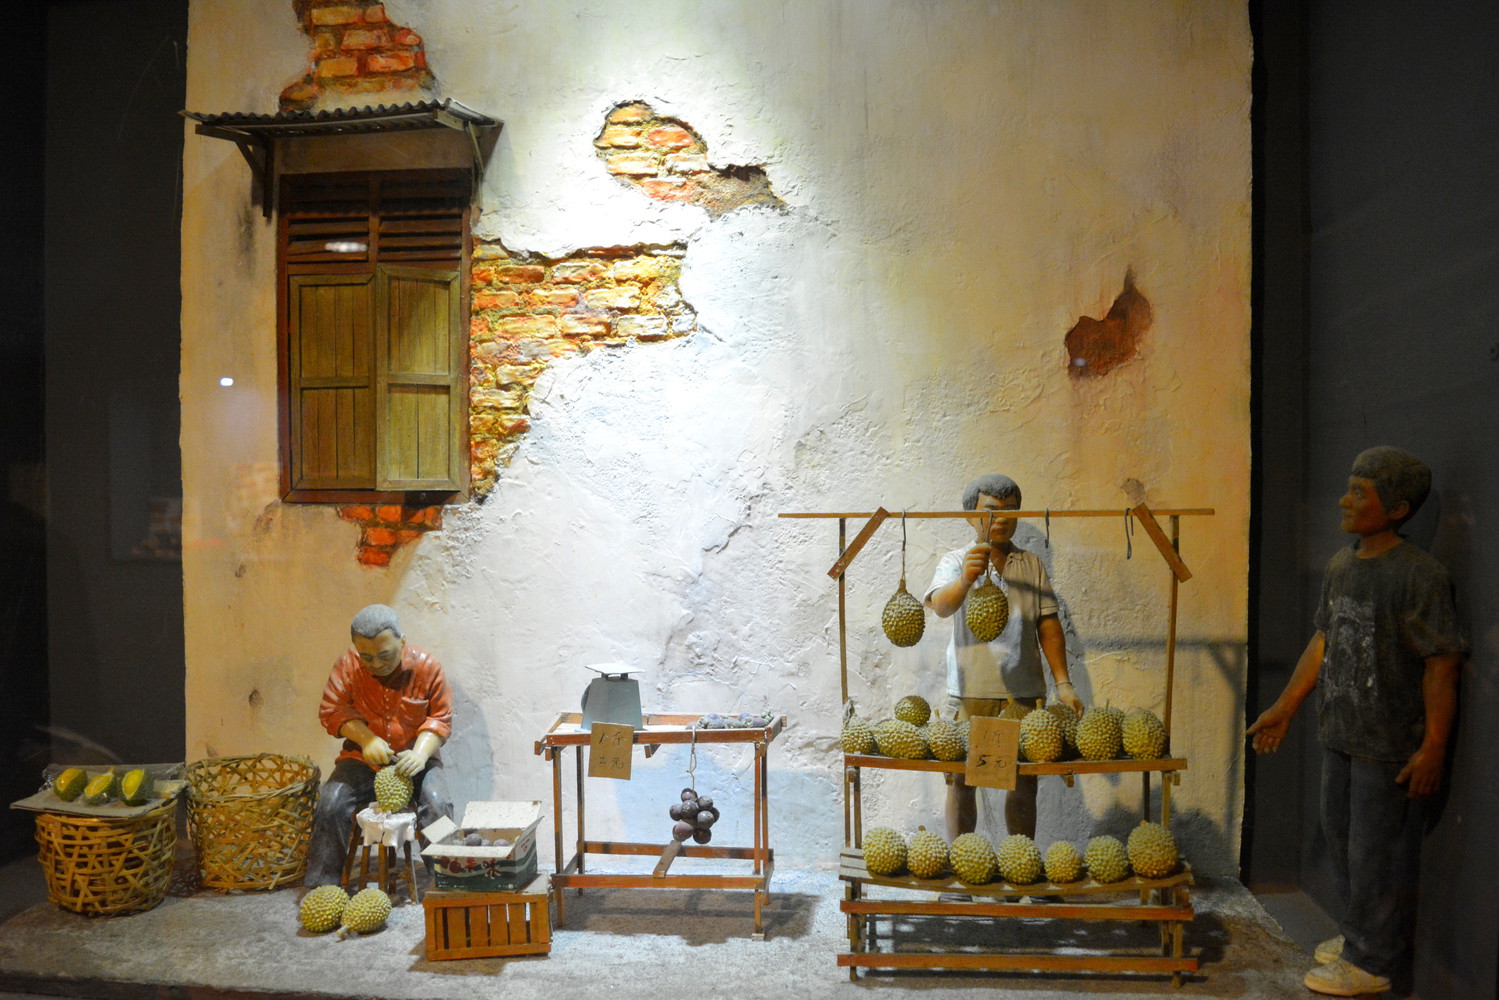 Miniature sculptures of men selling and slicing durians